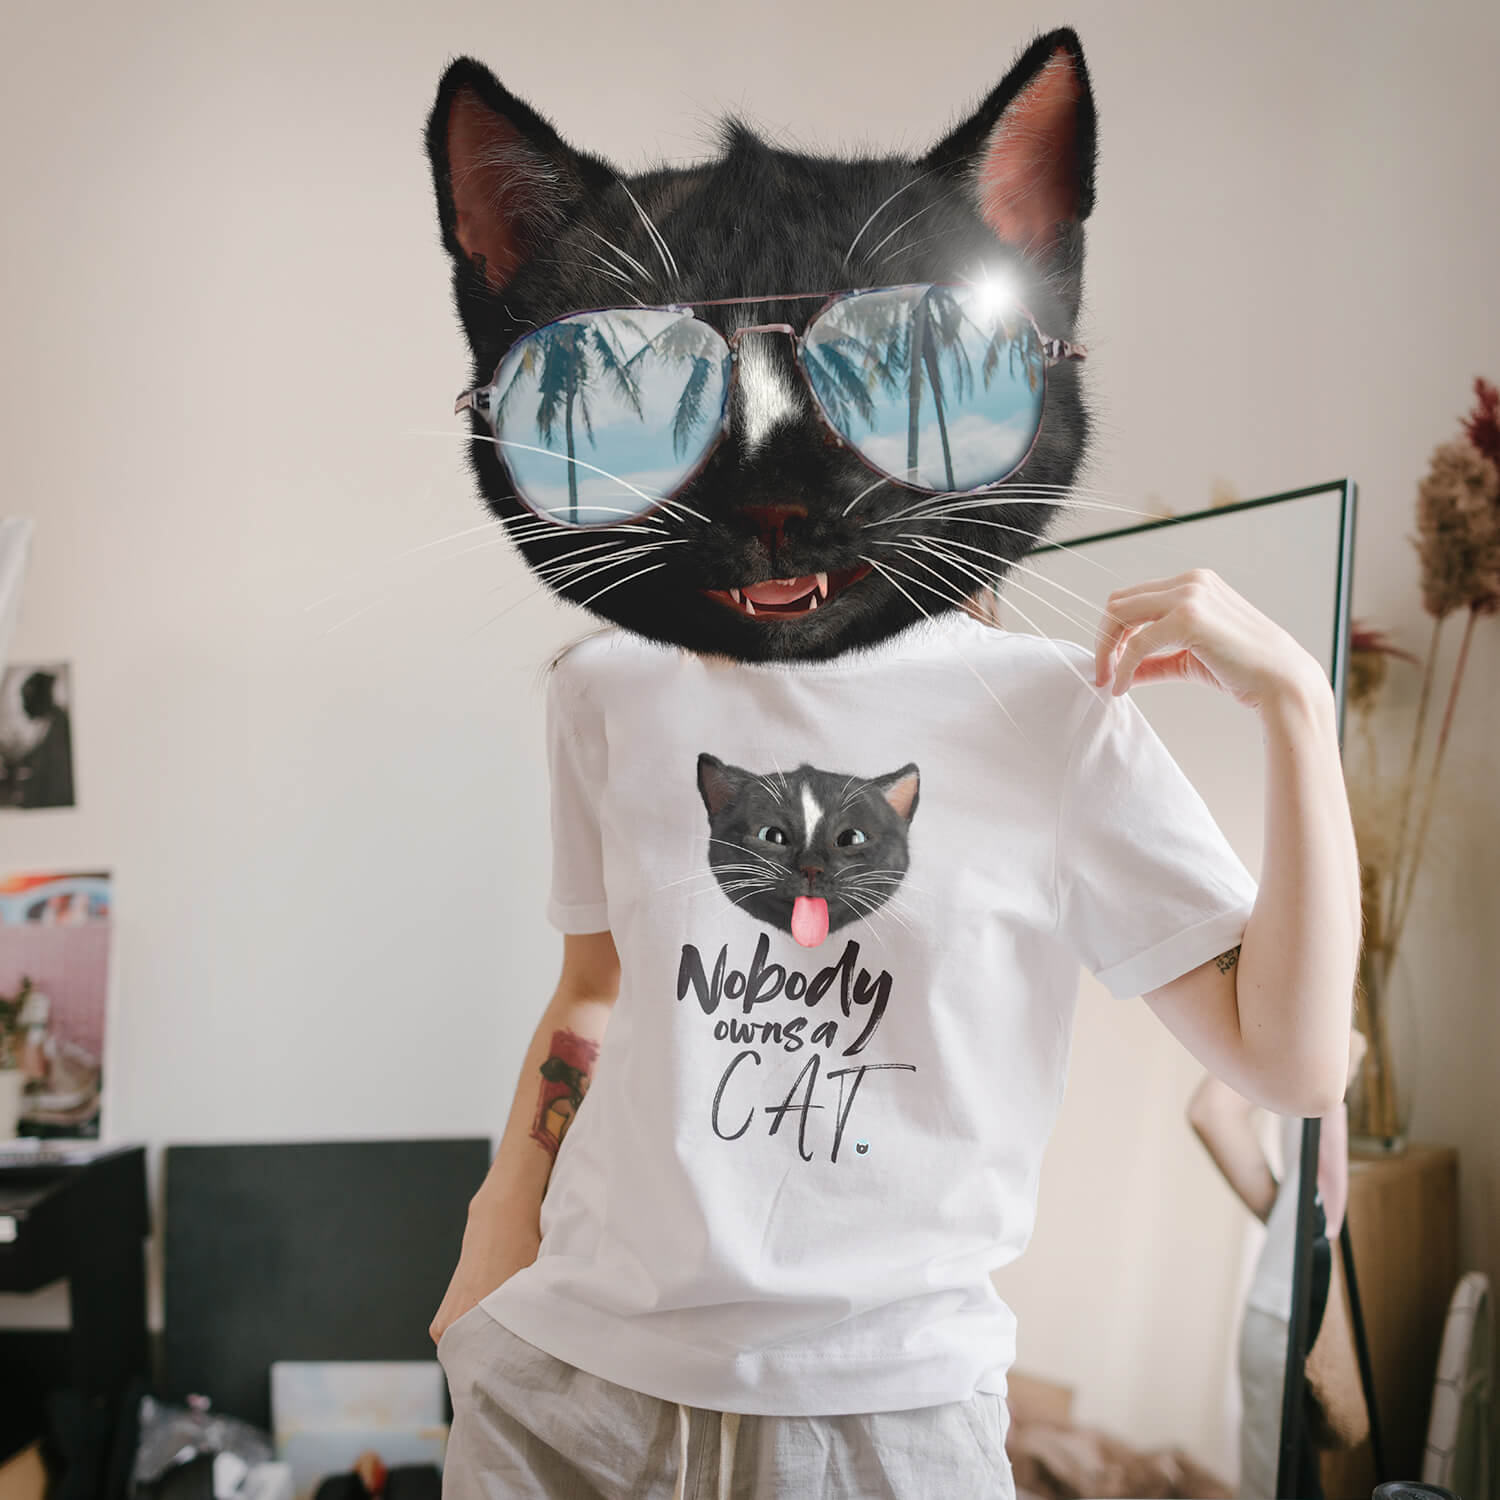 All Over Print 3D Tshirt Men Funny T Shirt Genetically Engineered Catgirls  for Domestic Ownership Graphic T-Shirt – WhiteBlack Store